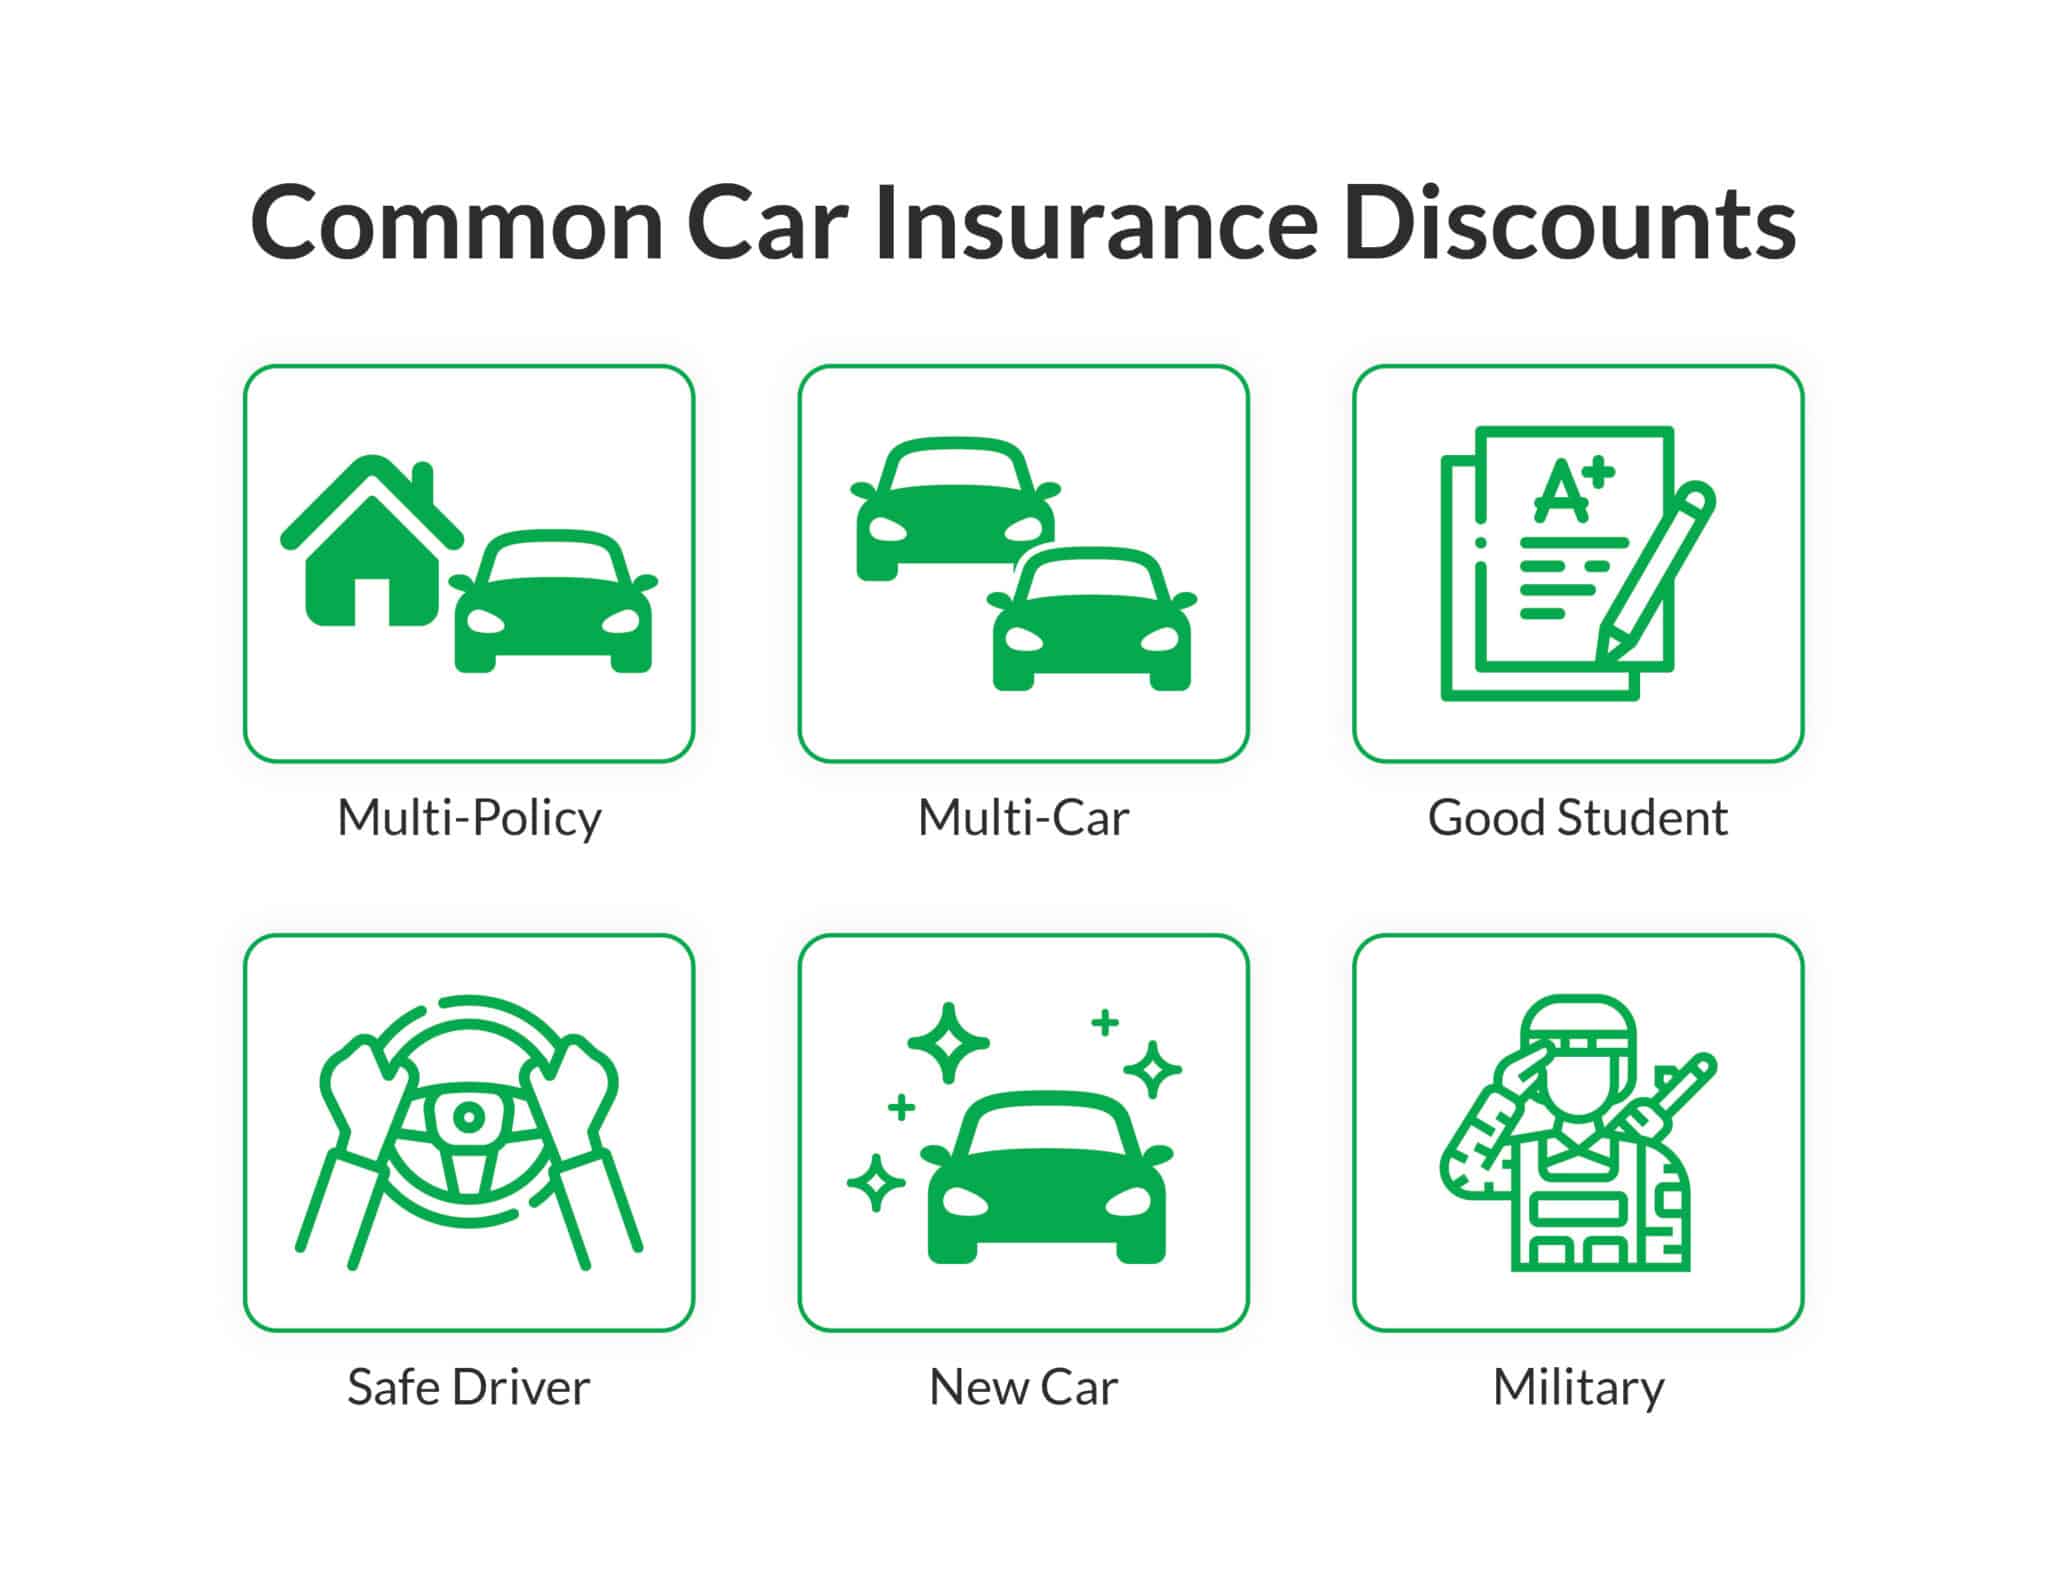 Icons representing six common discounts offered by car insurance companies.